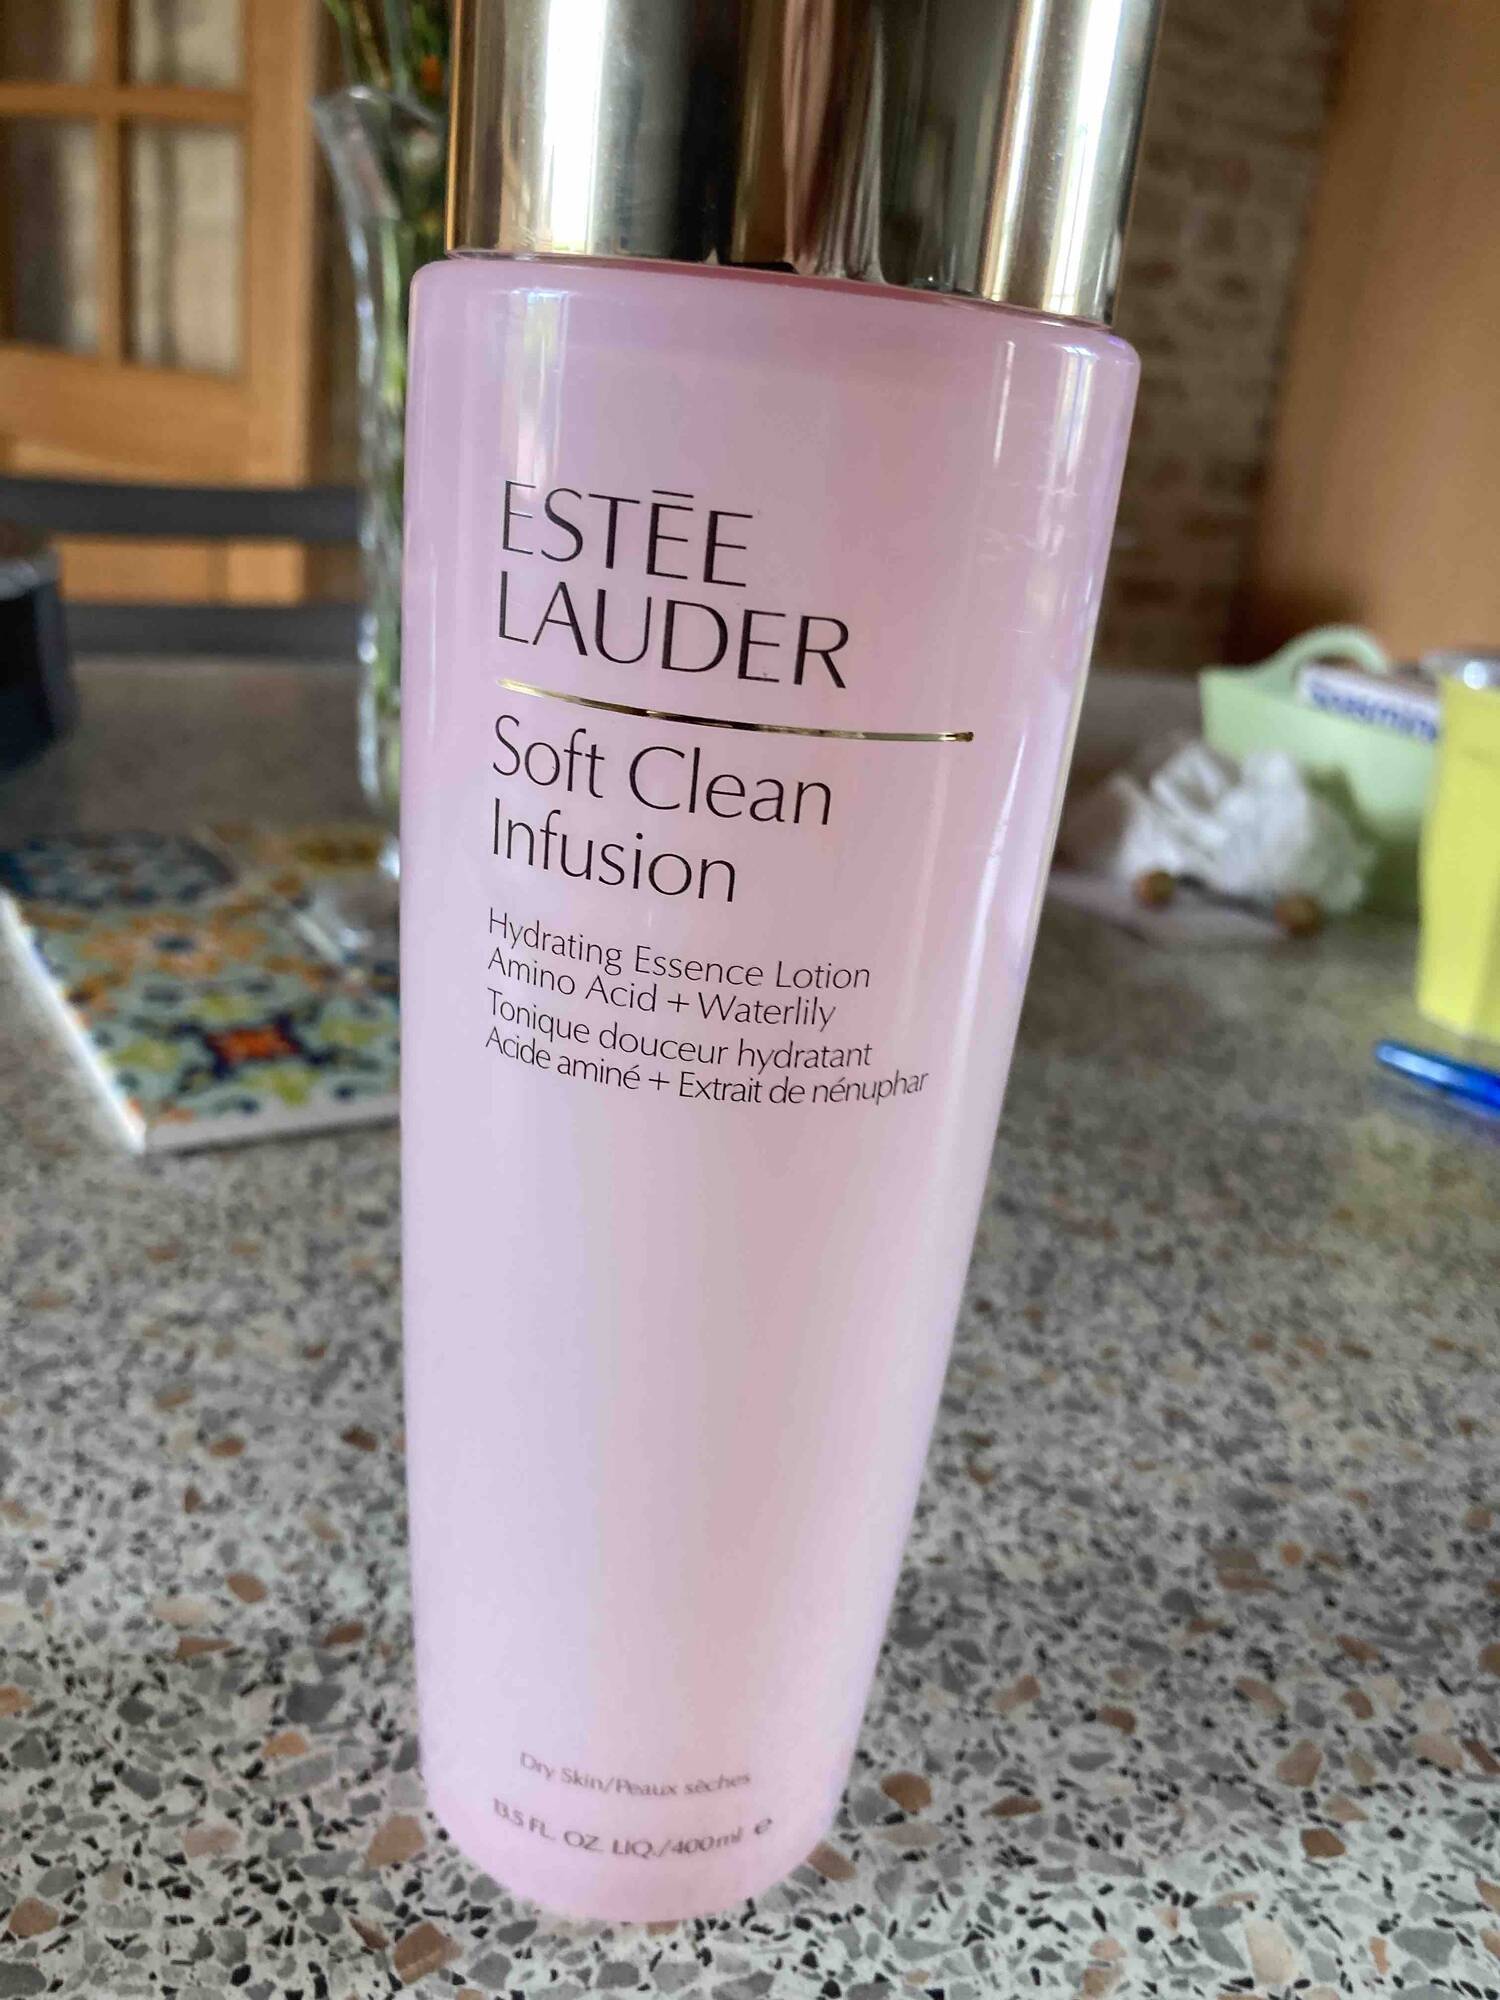 ESTEE LAUDER - Soft clean infusion - Hydrating essence lotion